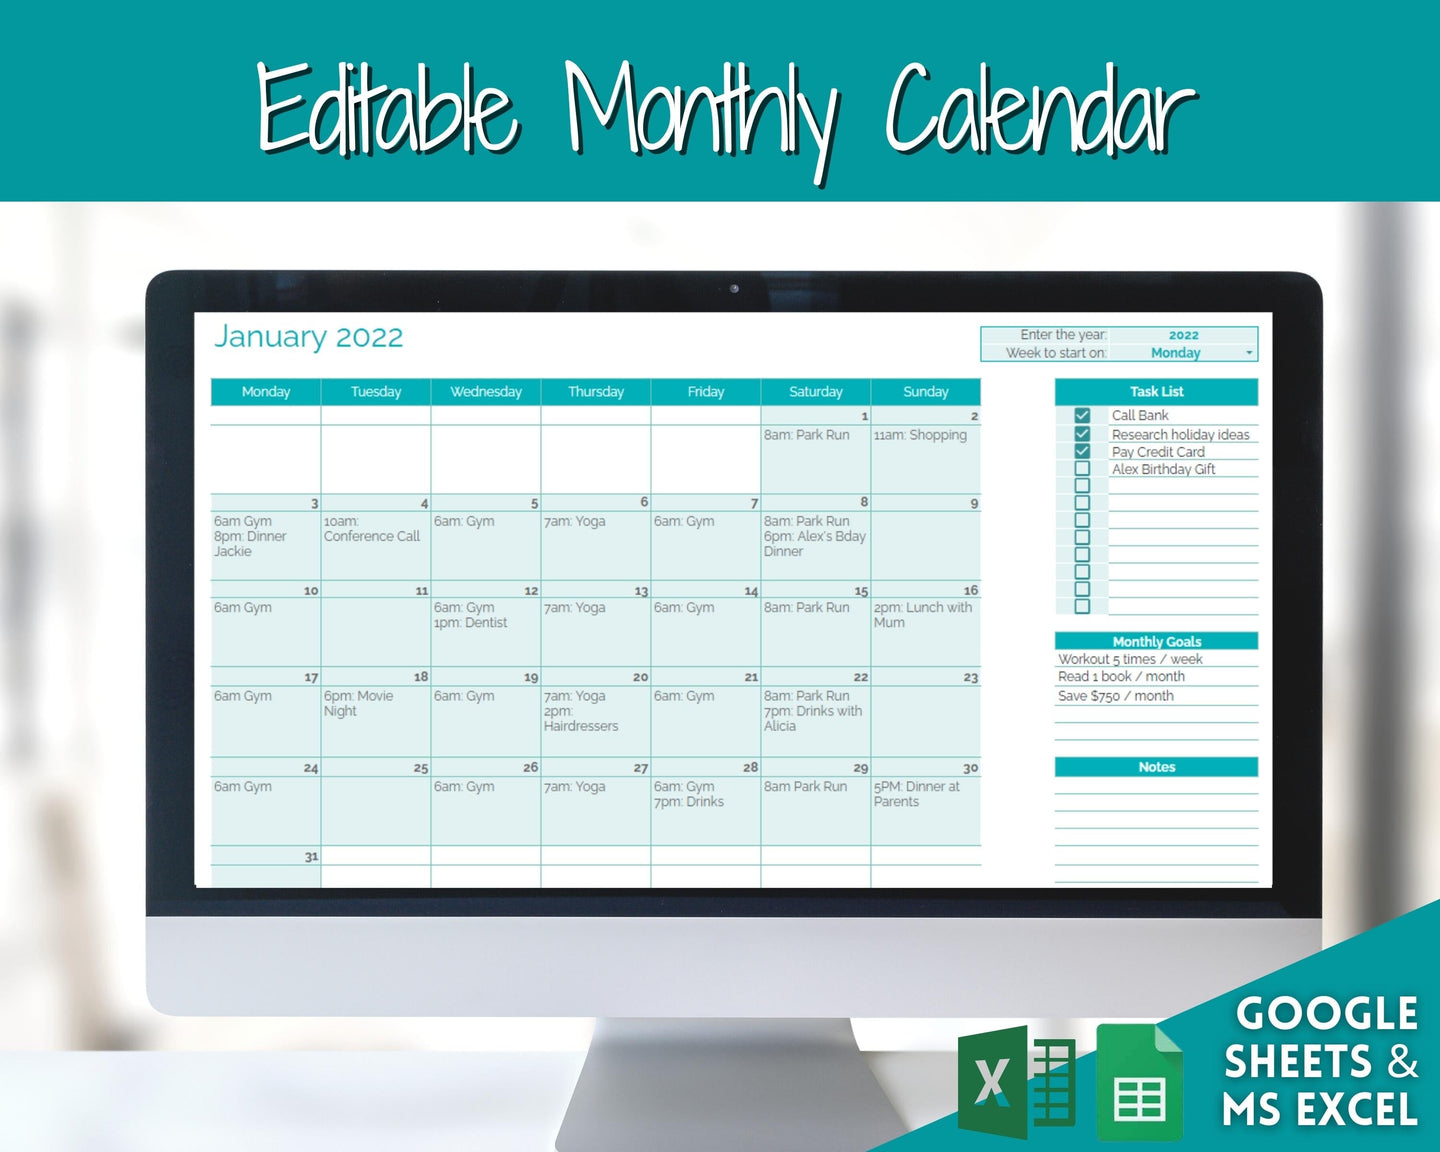 EDITABLE Monthly Calendar, Monthly Planner Template, Automated Spreadsheet, Google Sheets, Excel, Annual, To Do List, Undated Schedule - Teal